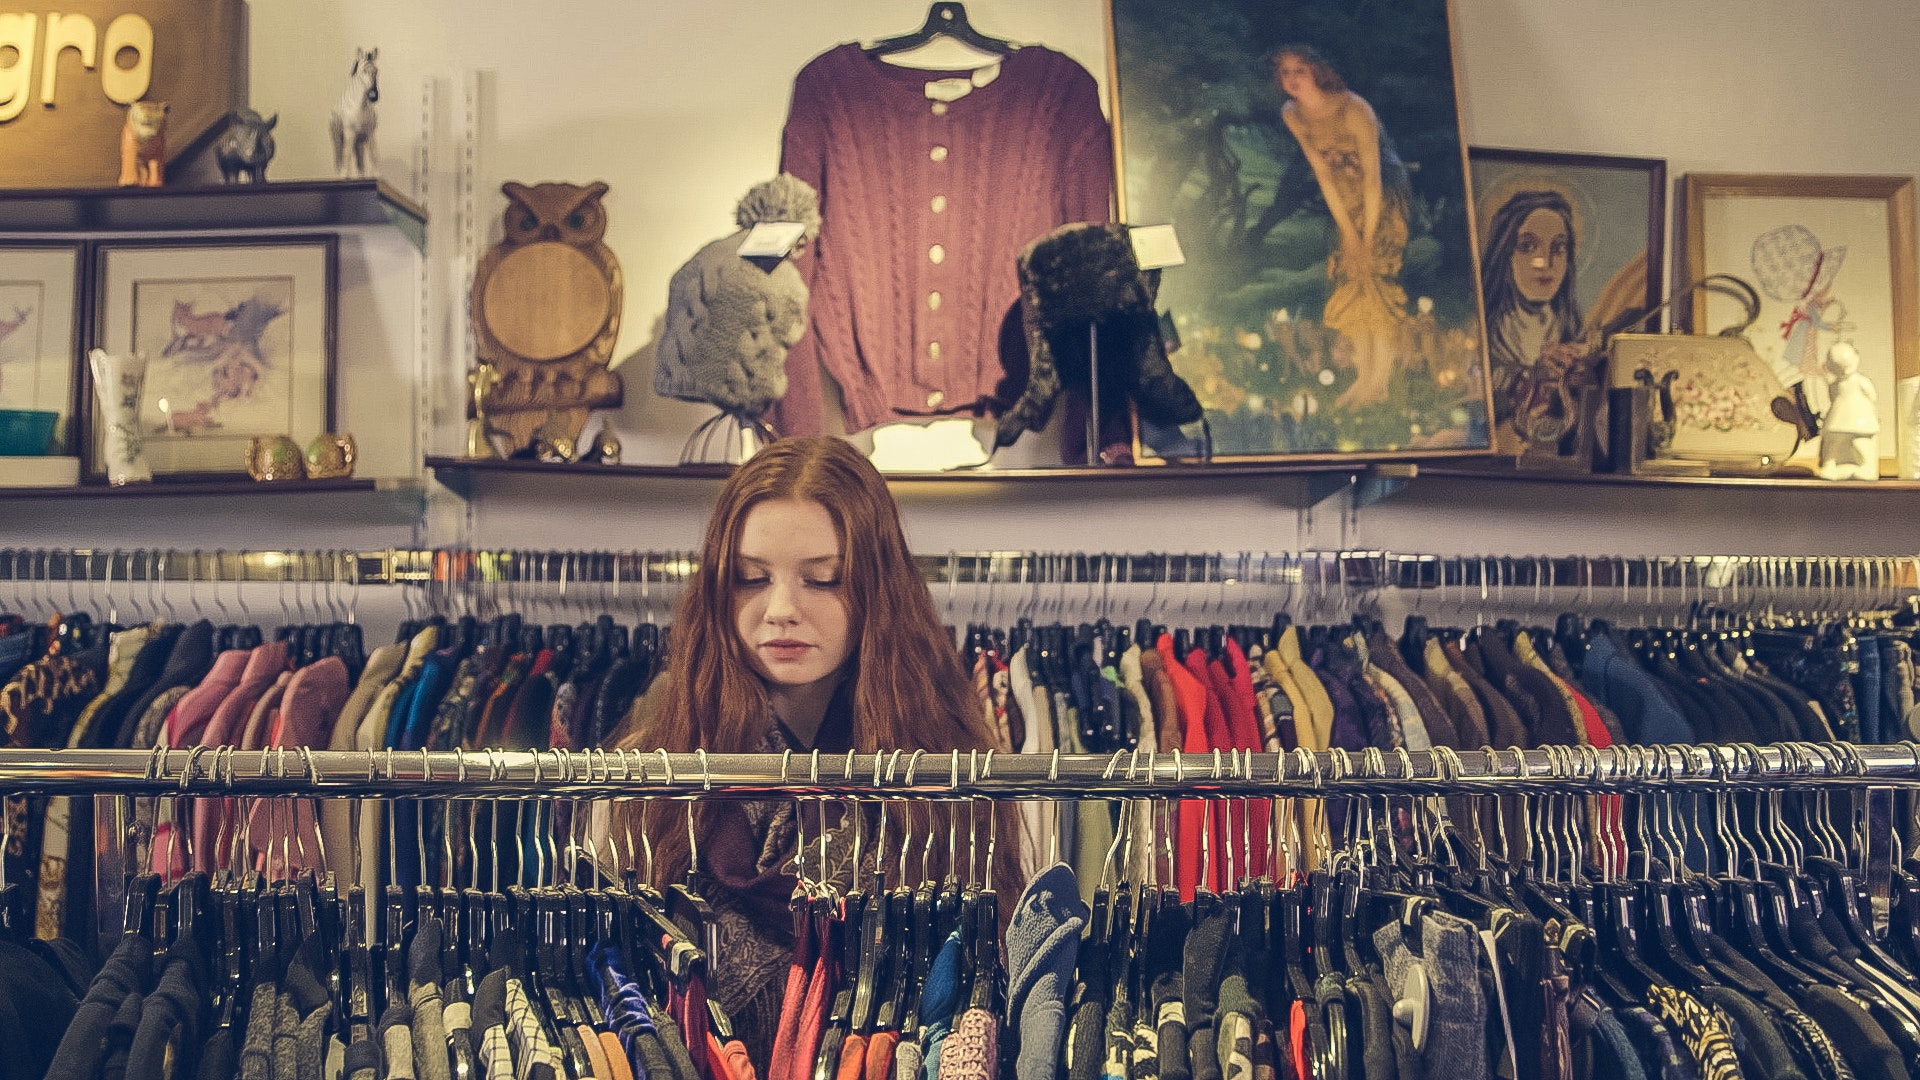 Redhead girl browsing a clothing rack at a thrift store